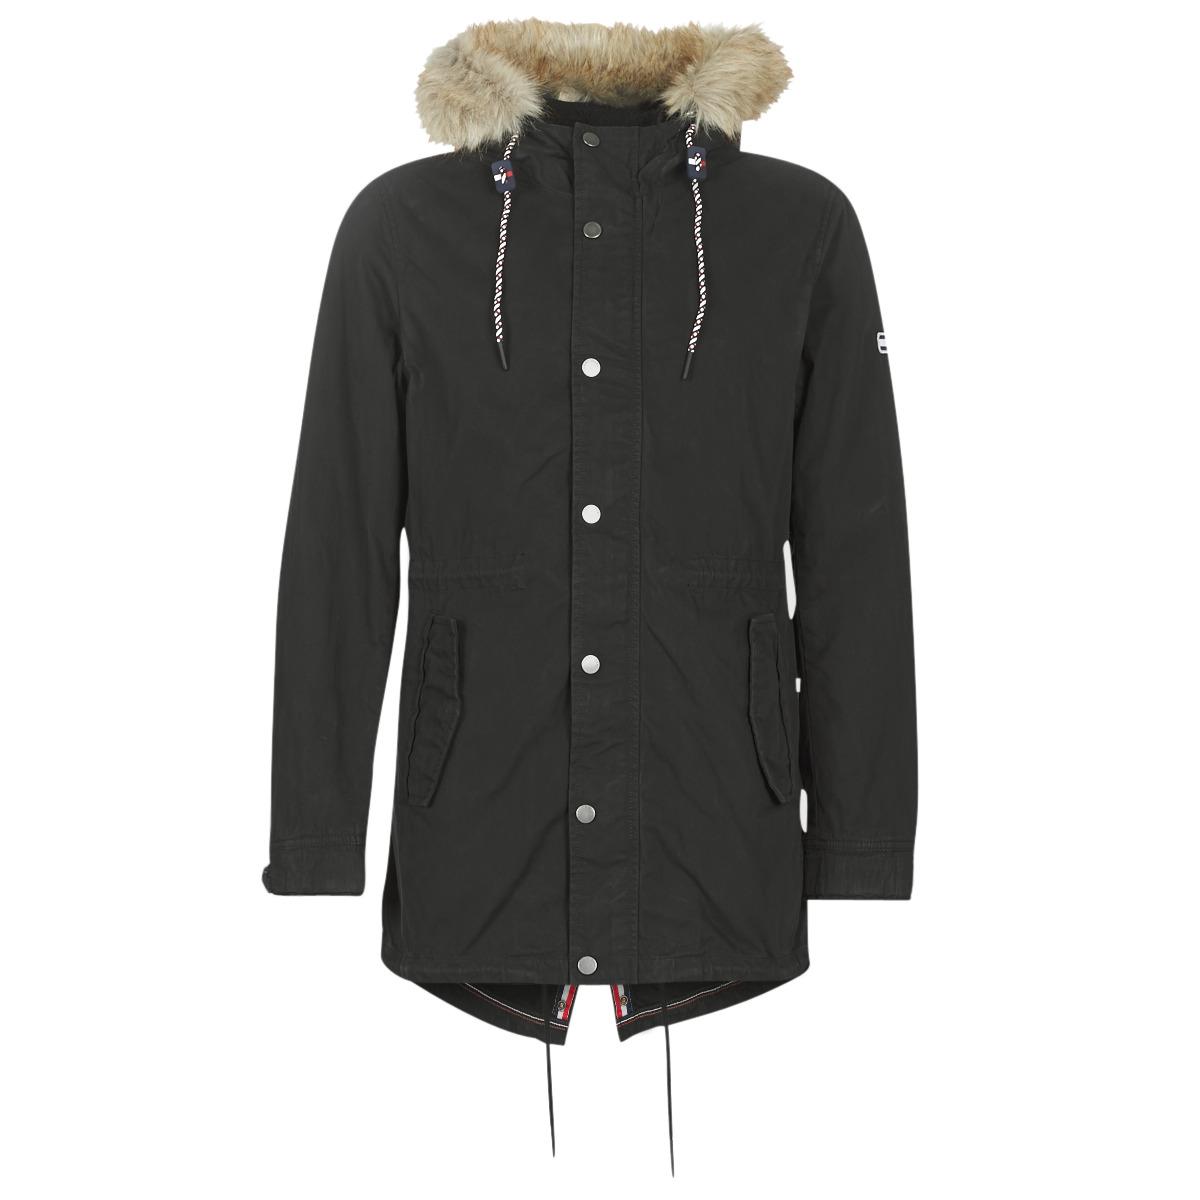 Tommy Hilfiger Tjm Lined Parka Hot Sale, 54% OFF | www.smokymountains.org